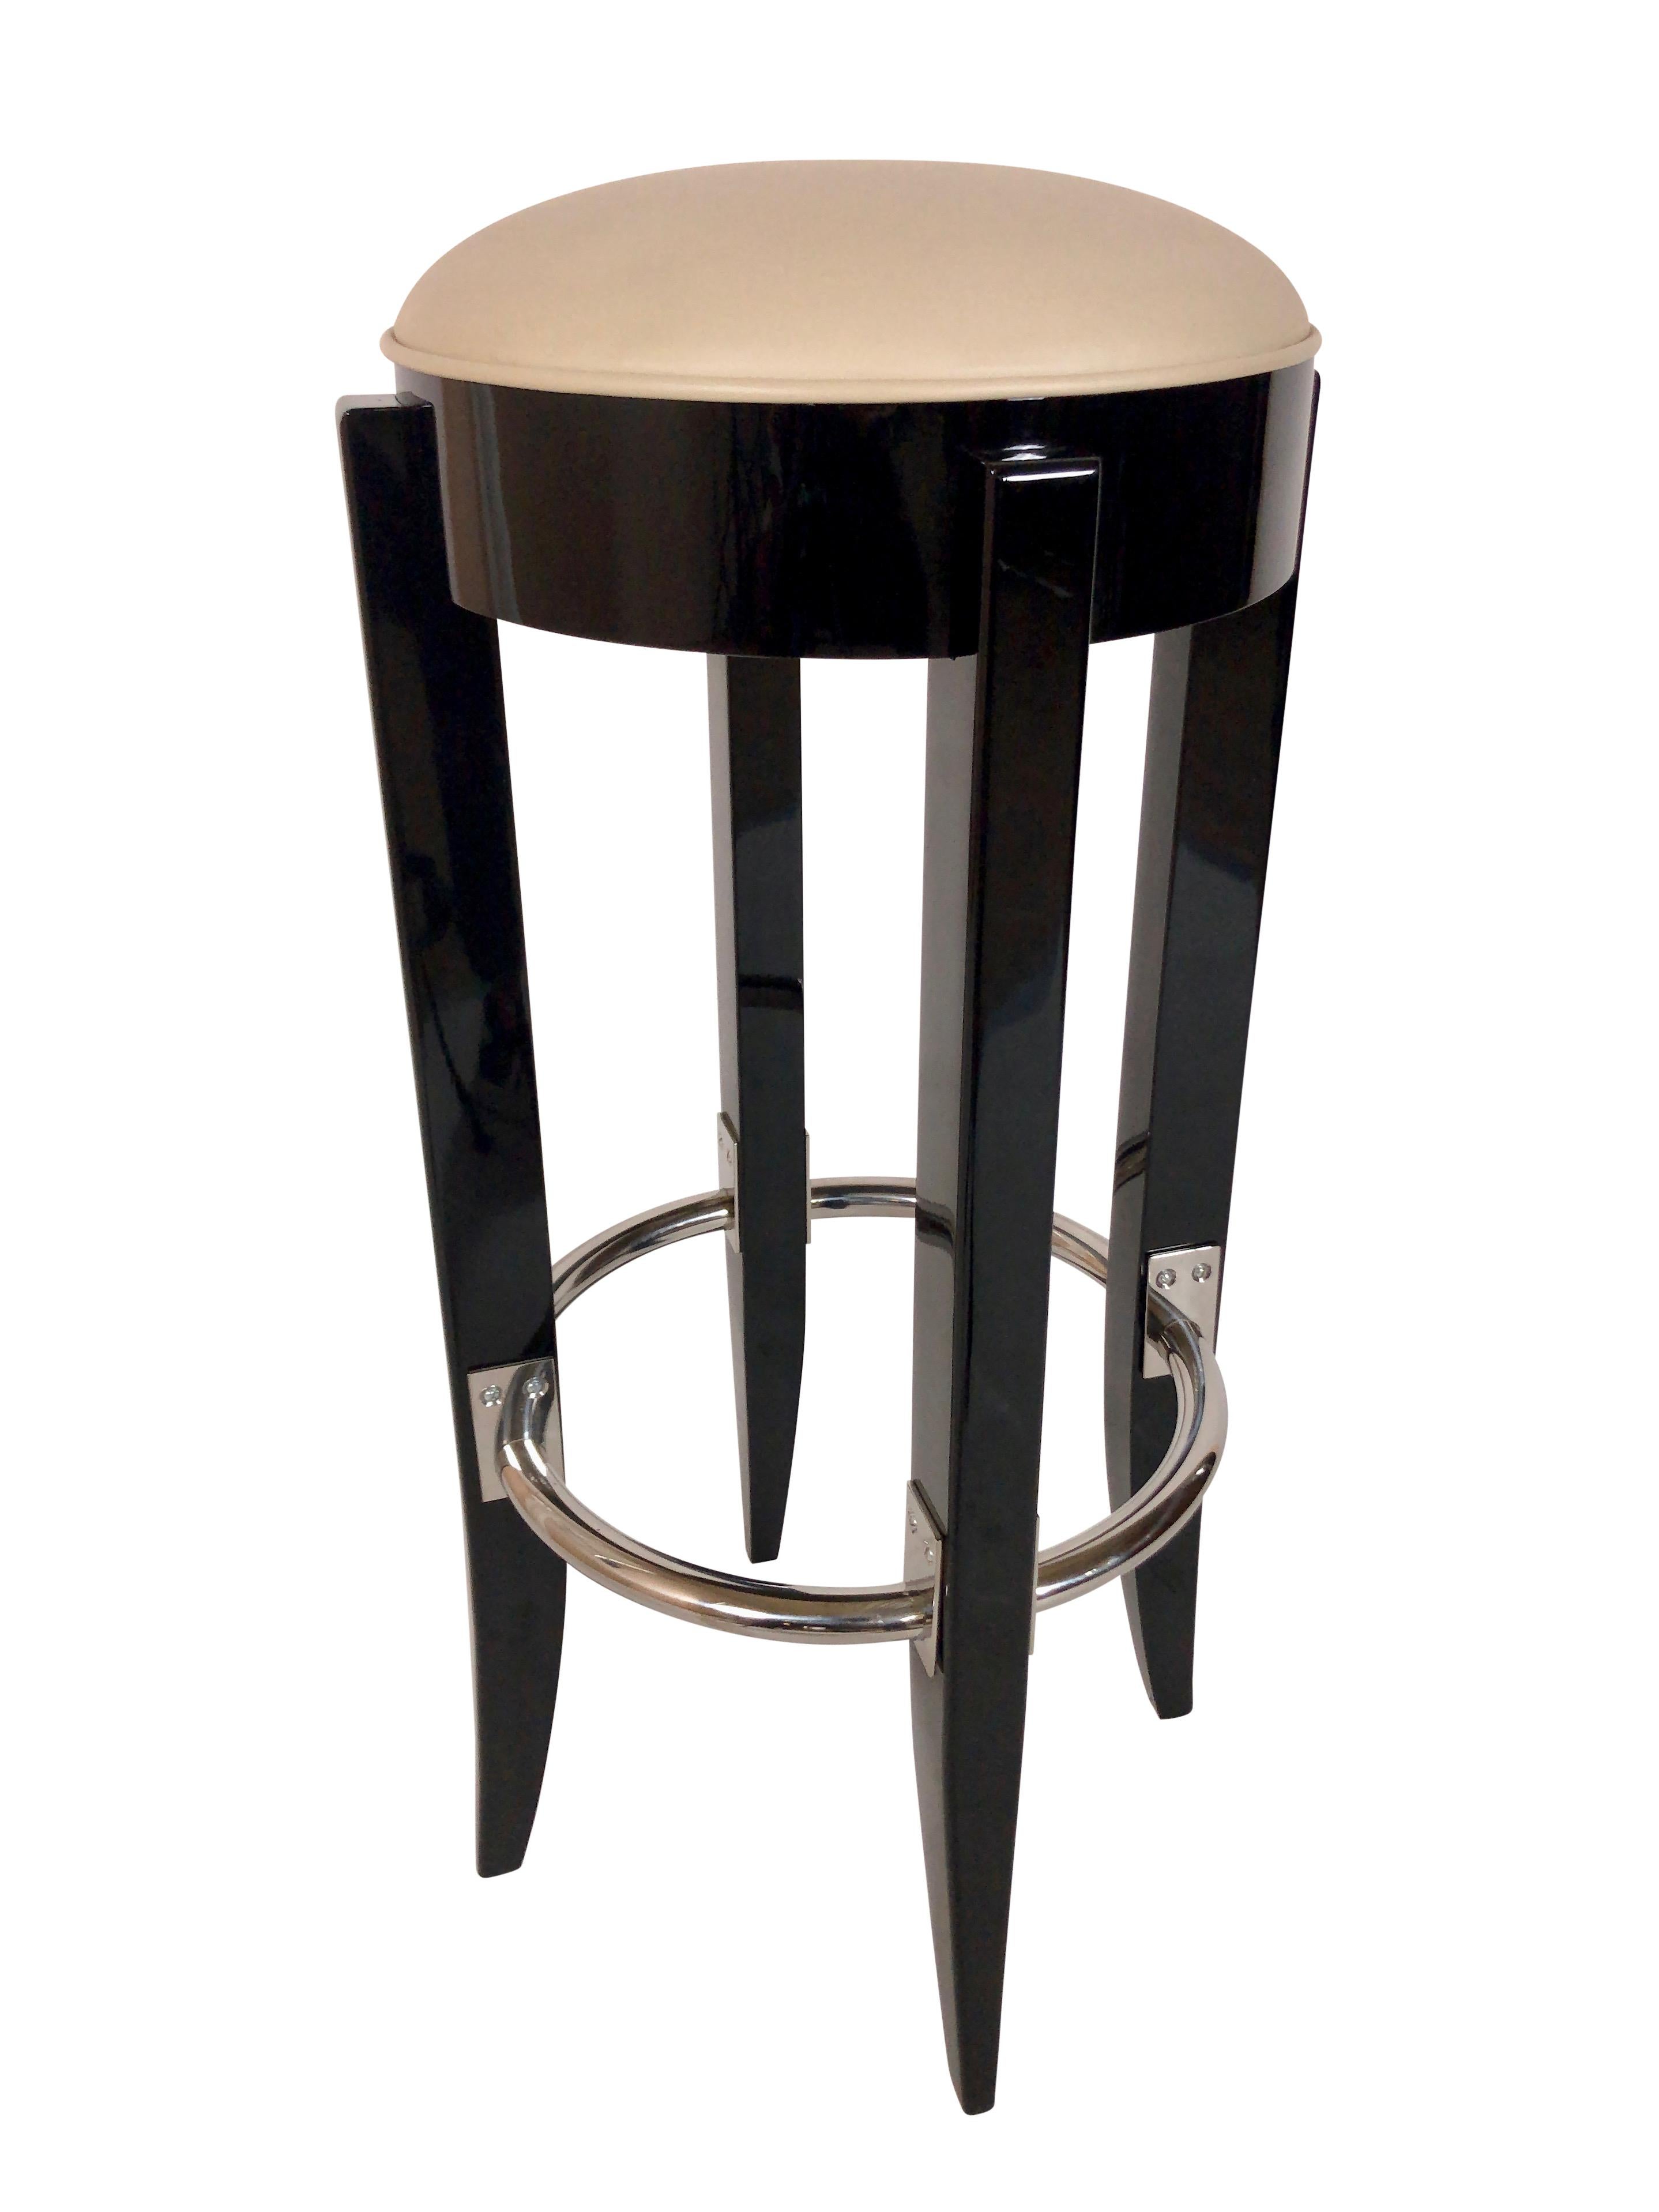 Enjoy a delicious drink in a noble ambience.
This bar stool invites you to linger.
And who knows who will join you at your side.

High quality! Handmade in Germany.

Black high gloss piano lacquered wood. 
Chromed metal applications. 
Original